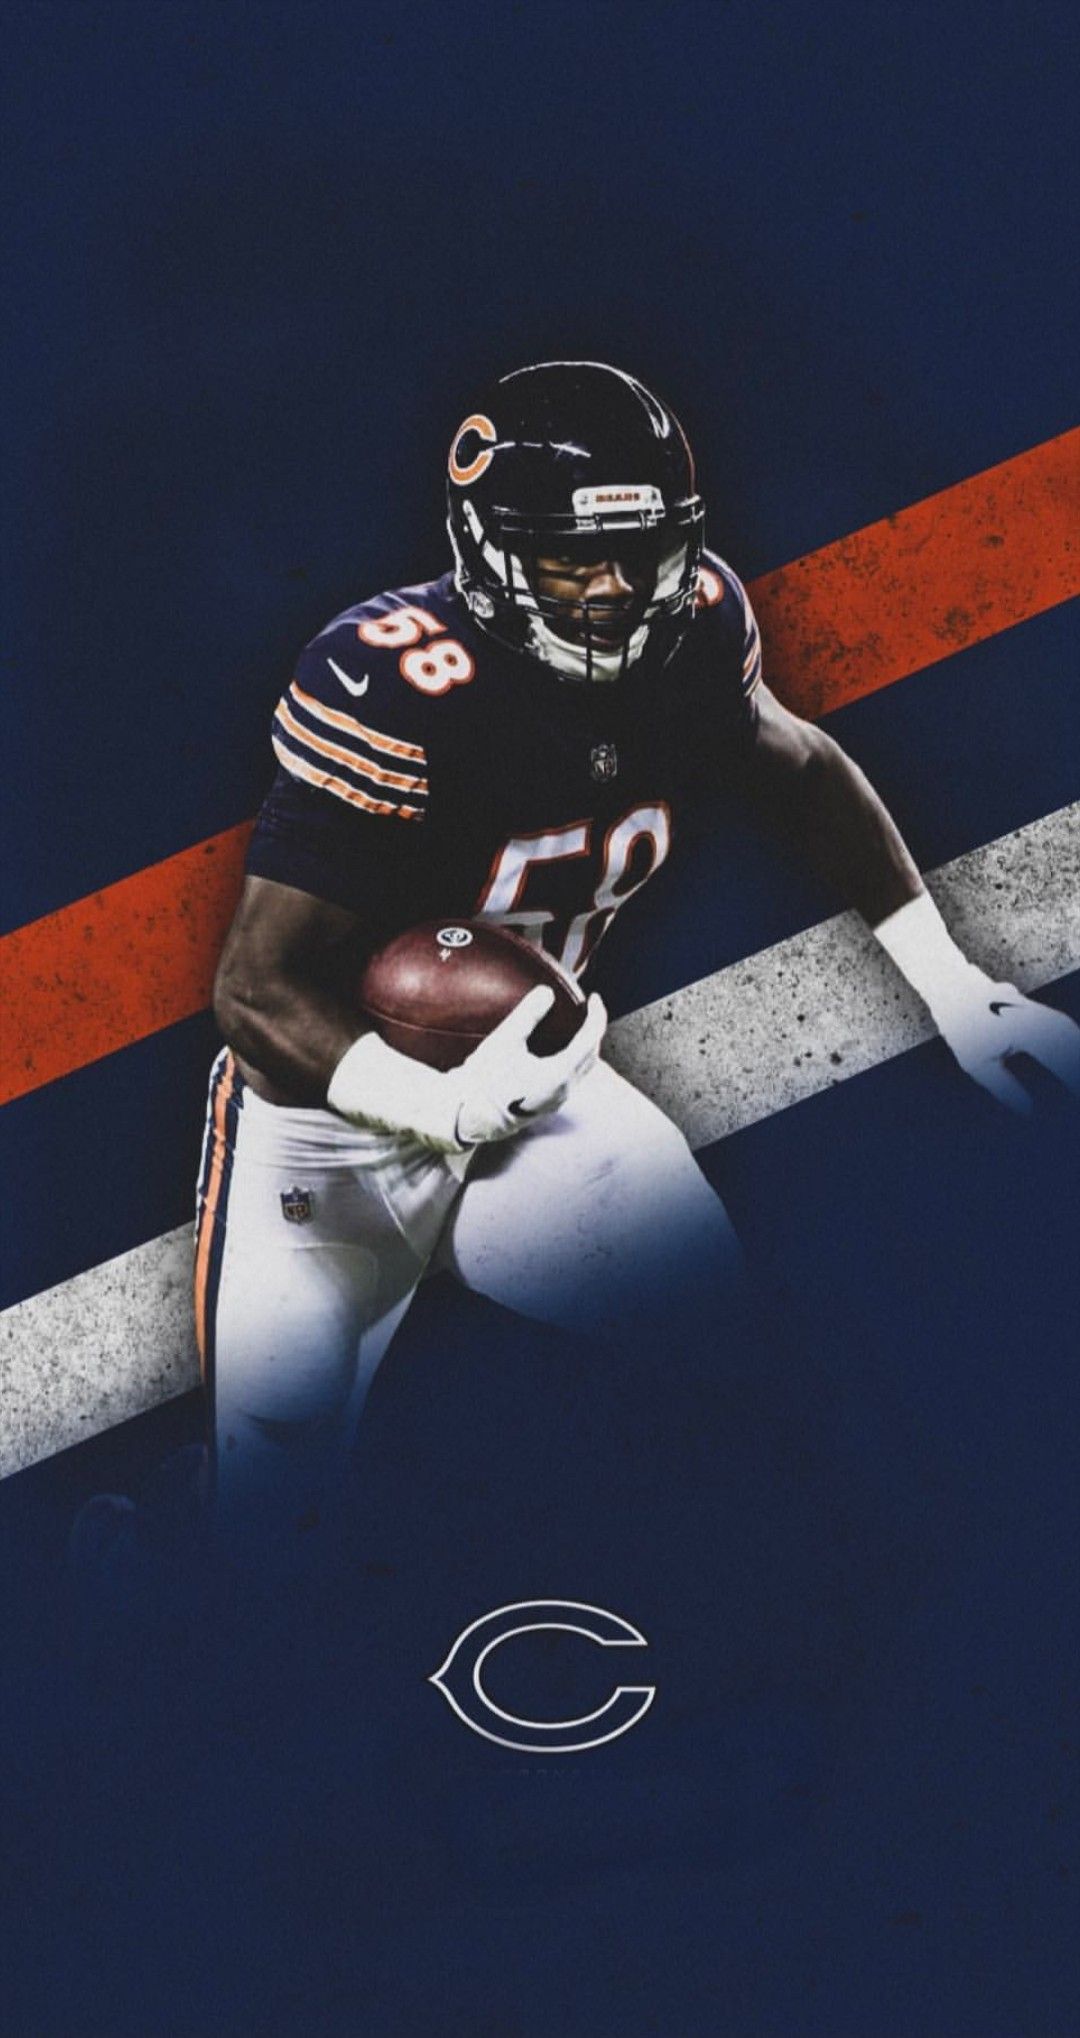 Roquan Smith. Chicago bears picture, Chicago bears football, Bears football